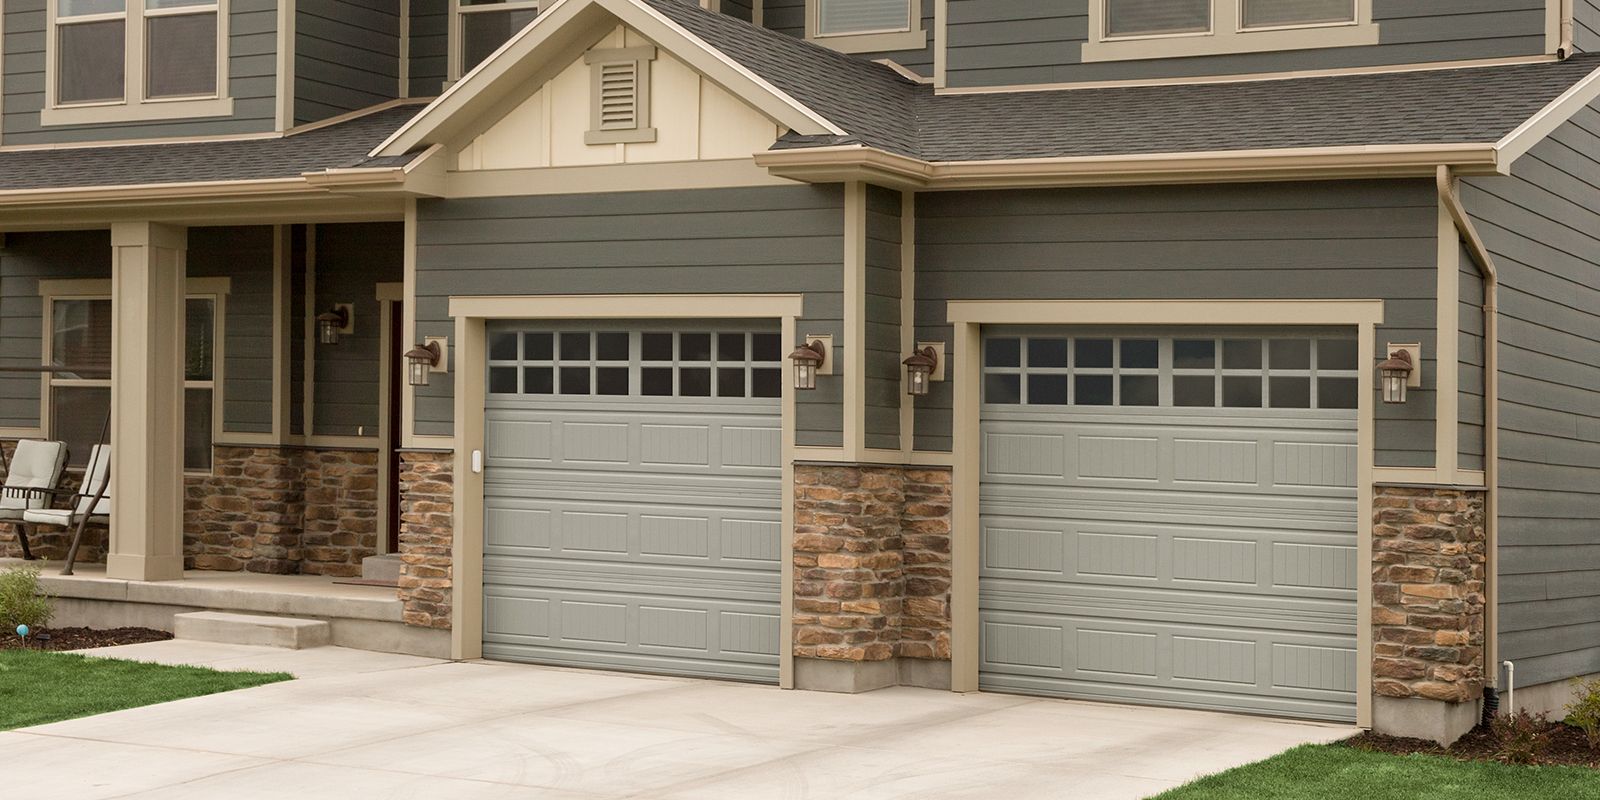 Frequently asked questions concerning garage doors